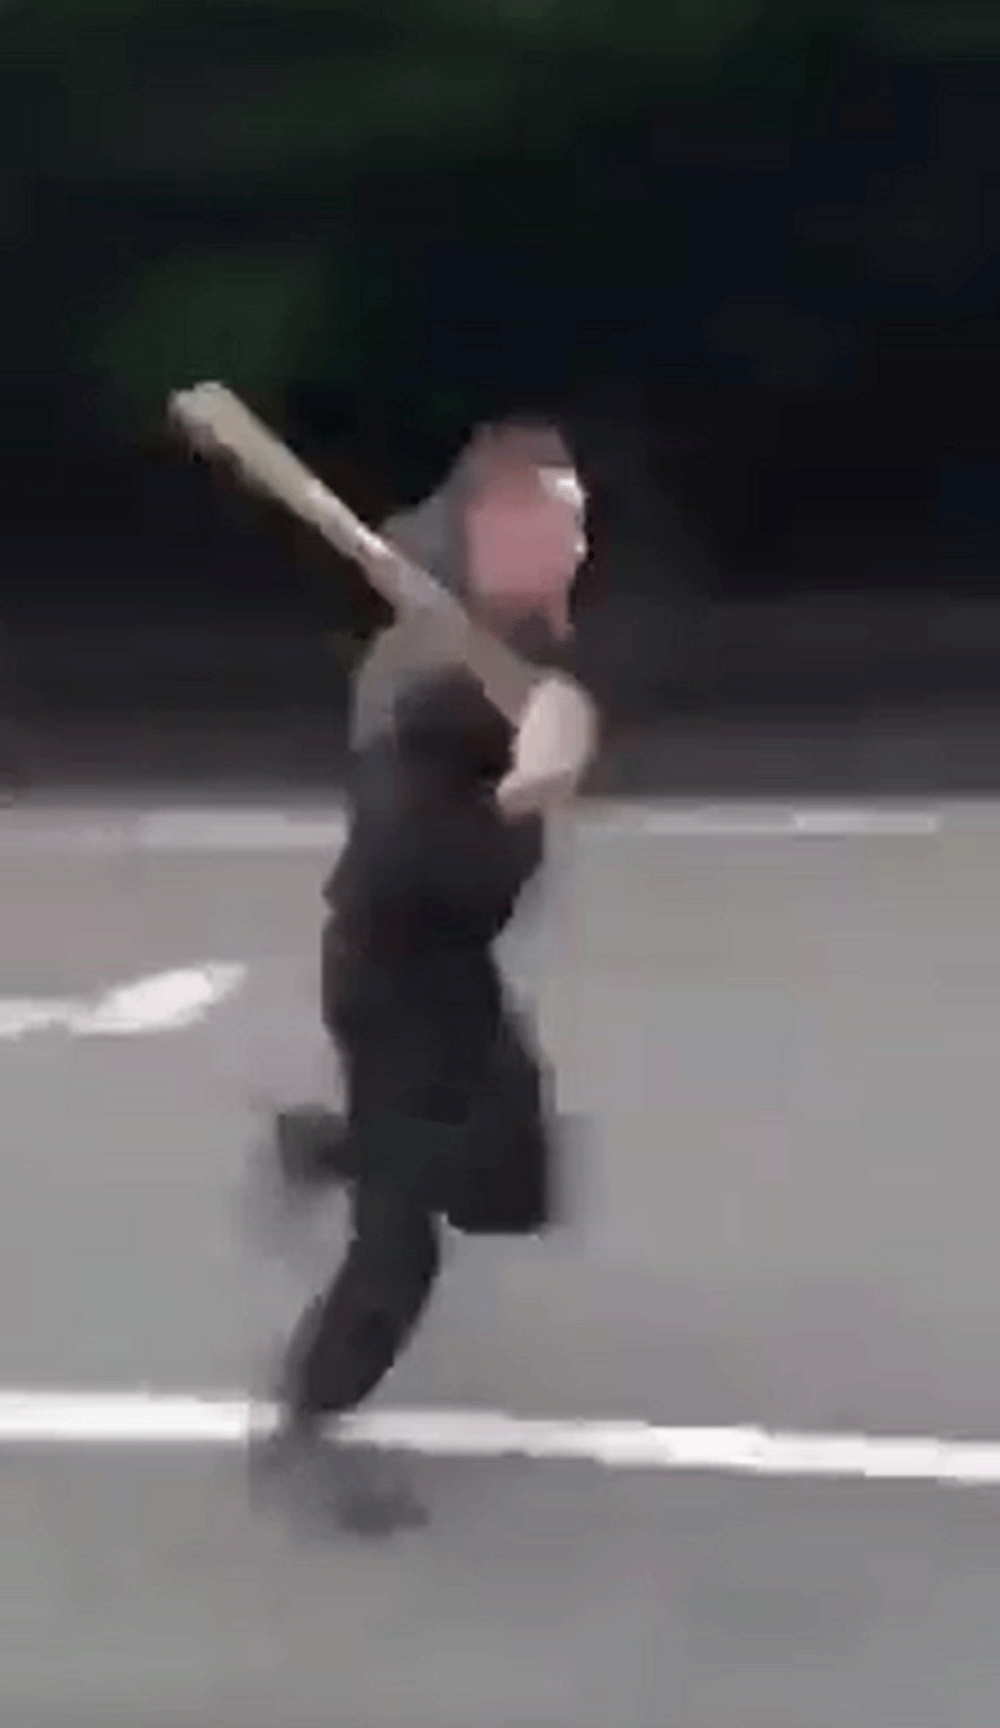 One man could be seen running down the road with a baseball bat